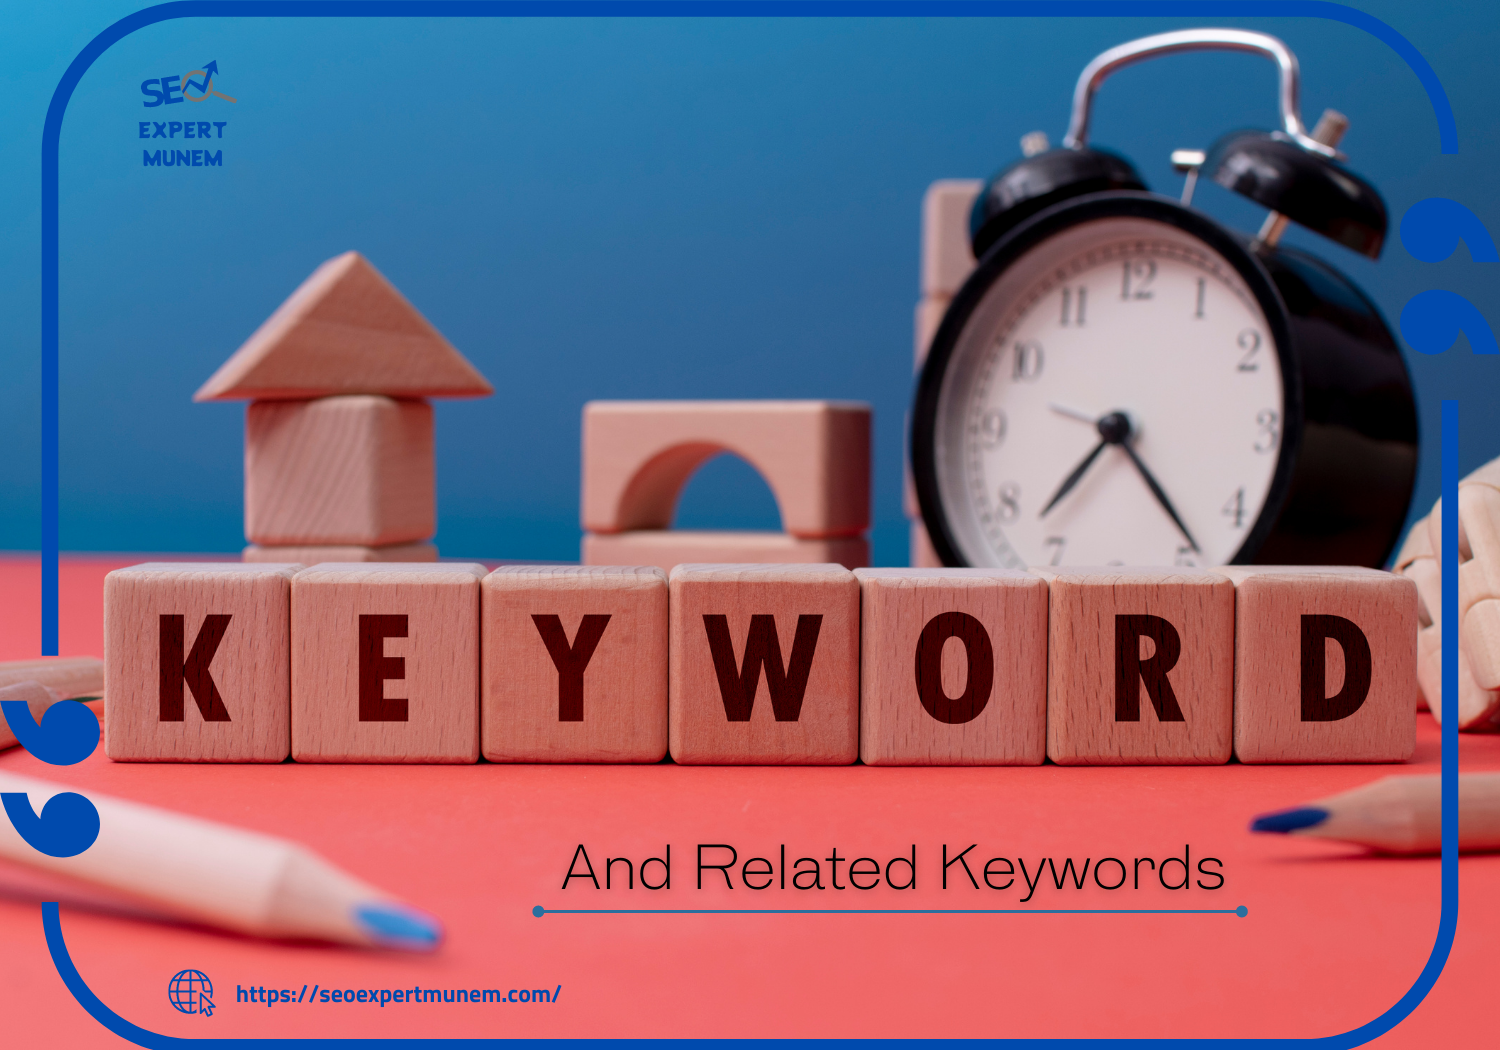 Use Related Keywords In The Article.